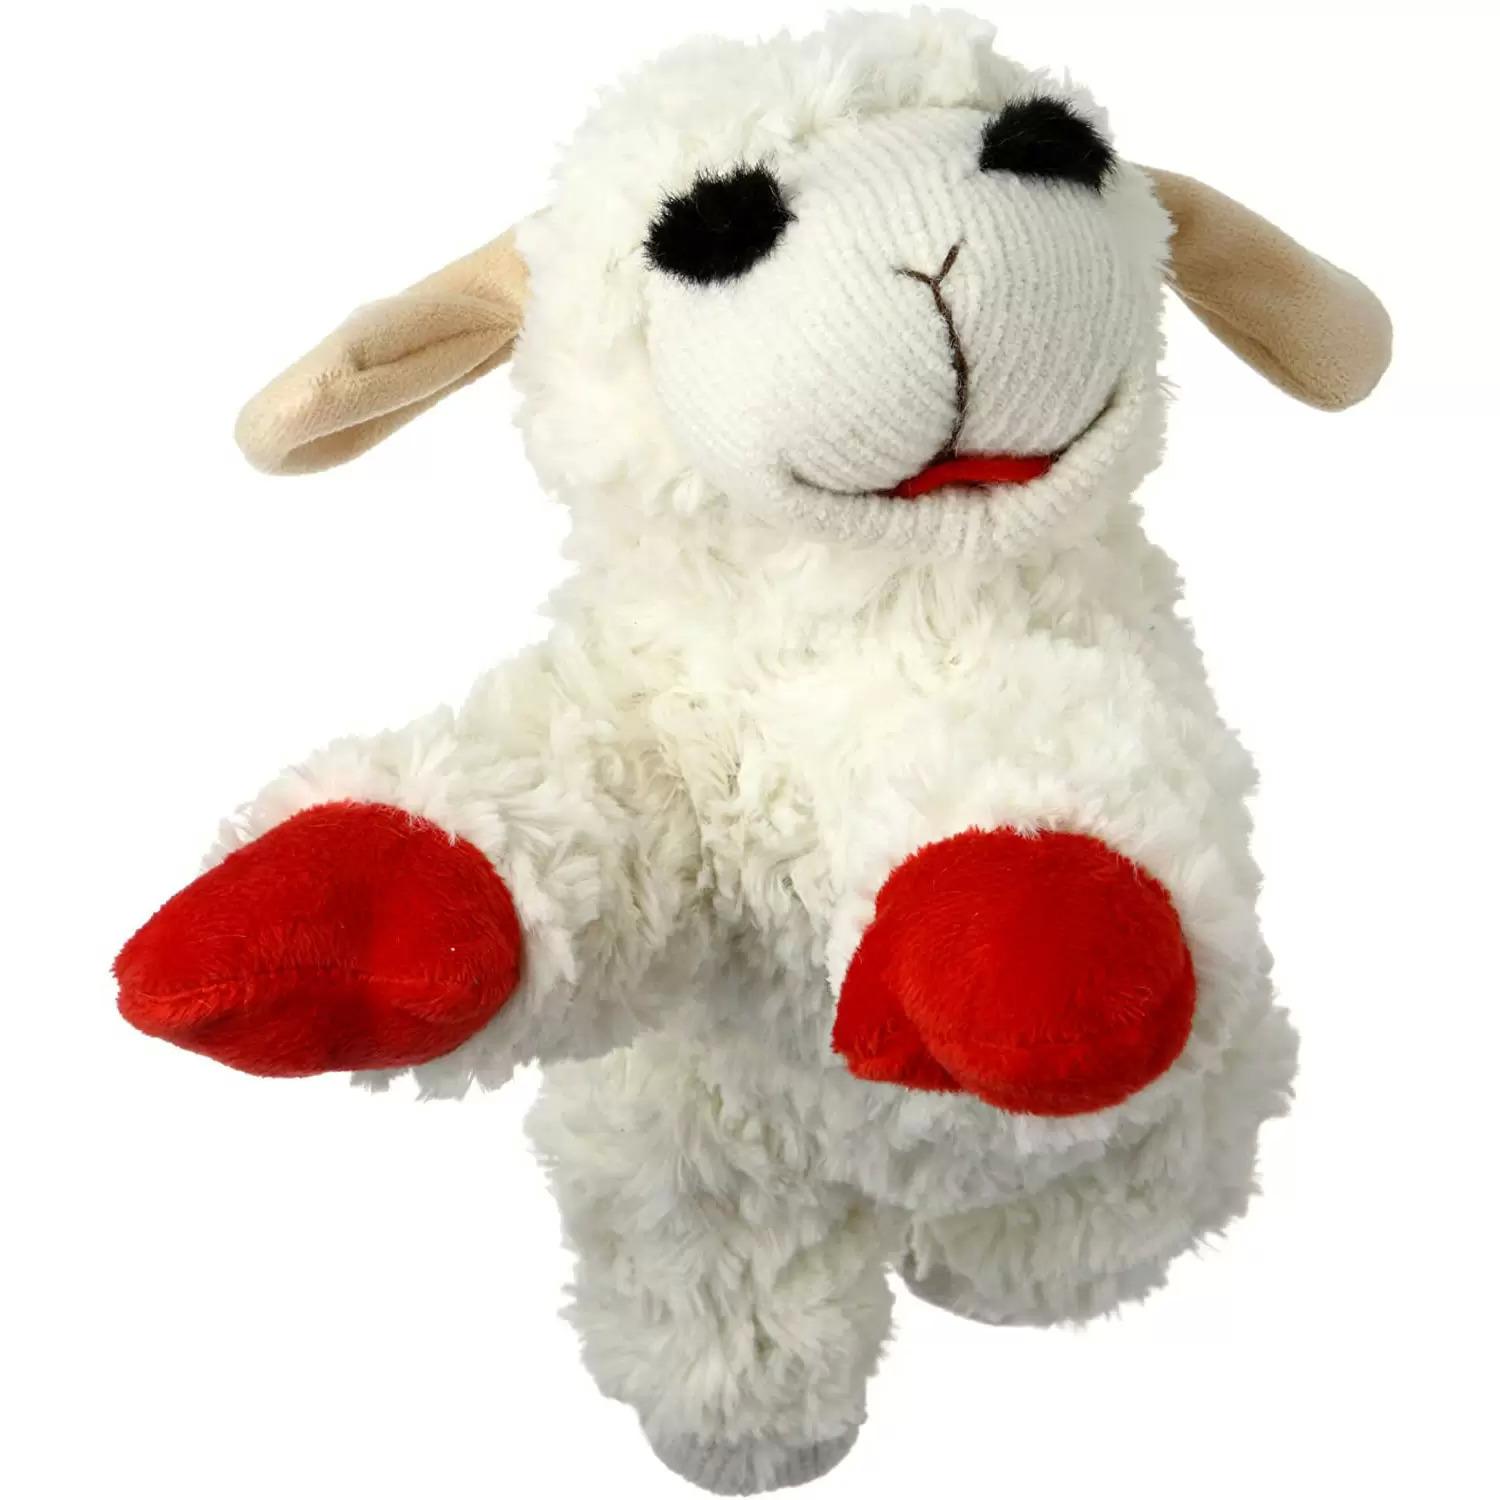 Multipet 10in Lambchop Plush Squeaker Dog Toy for $5.04 Shipped